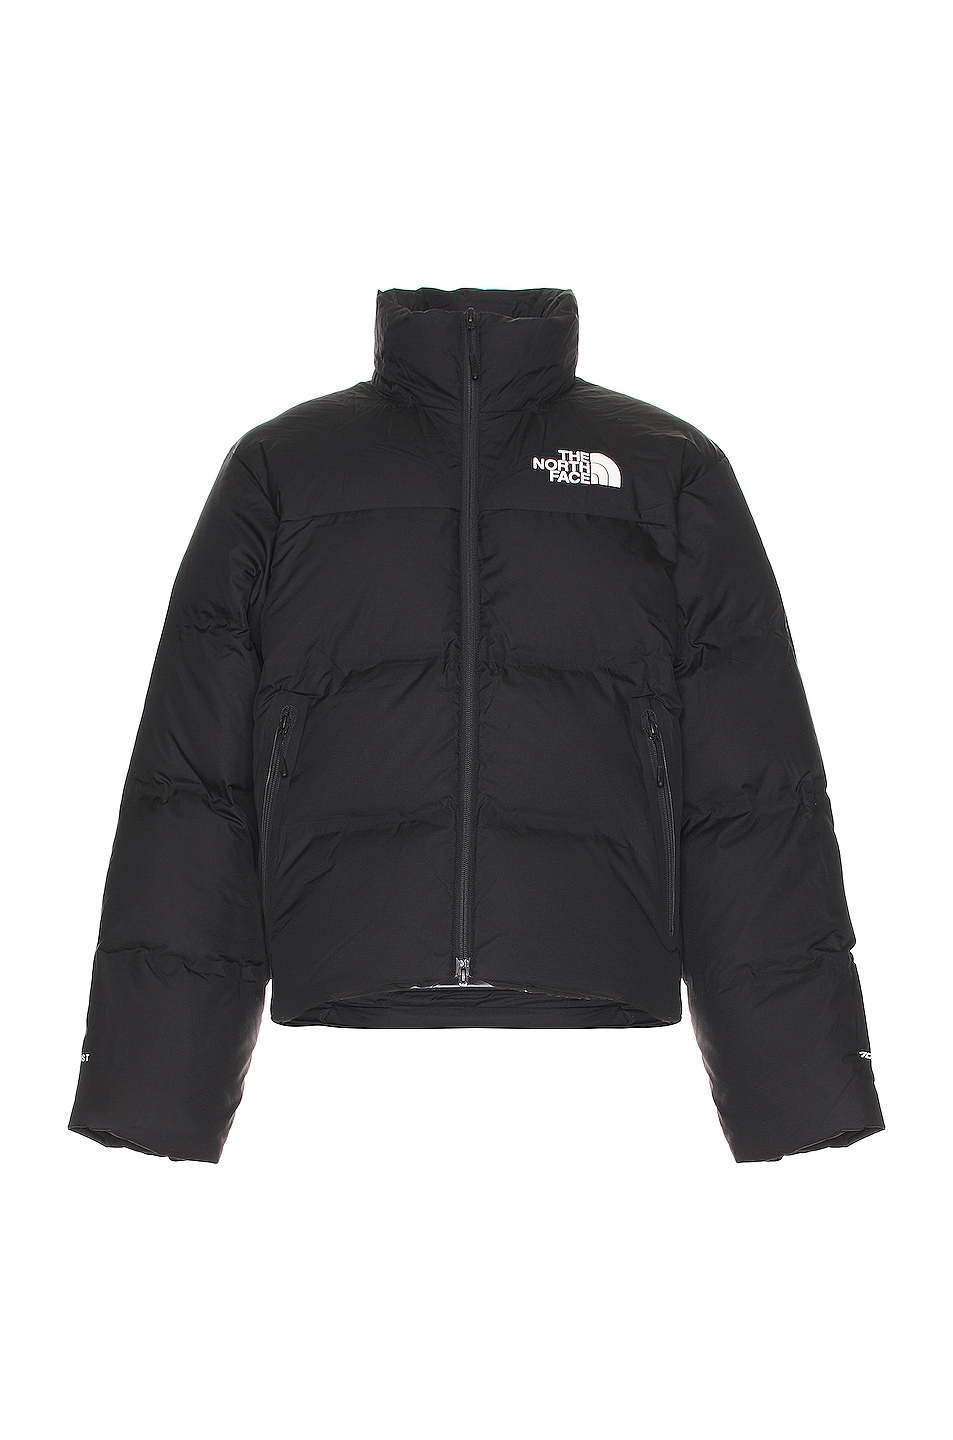 Image 1 of The North Face Rmst Nuptse Jacket in Tnf Black